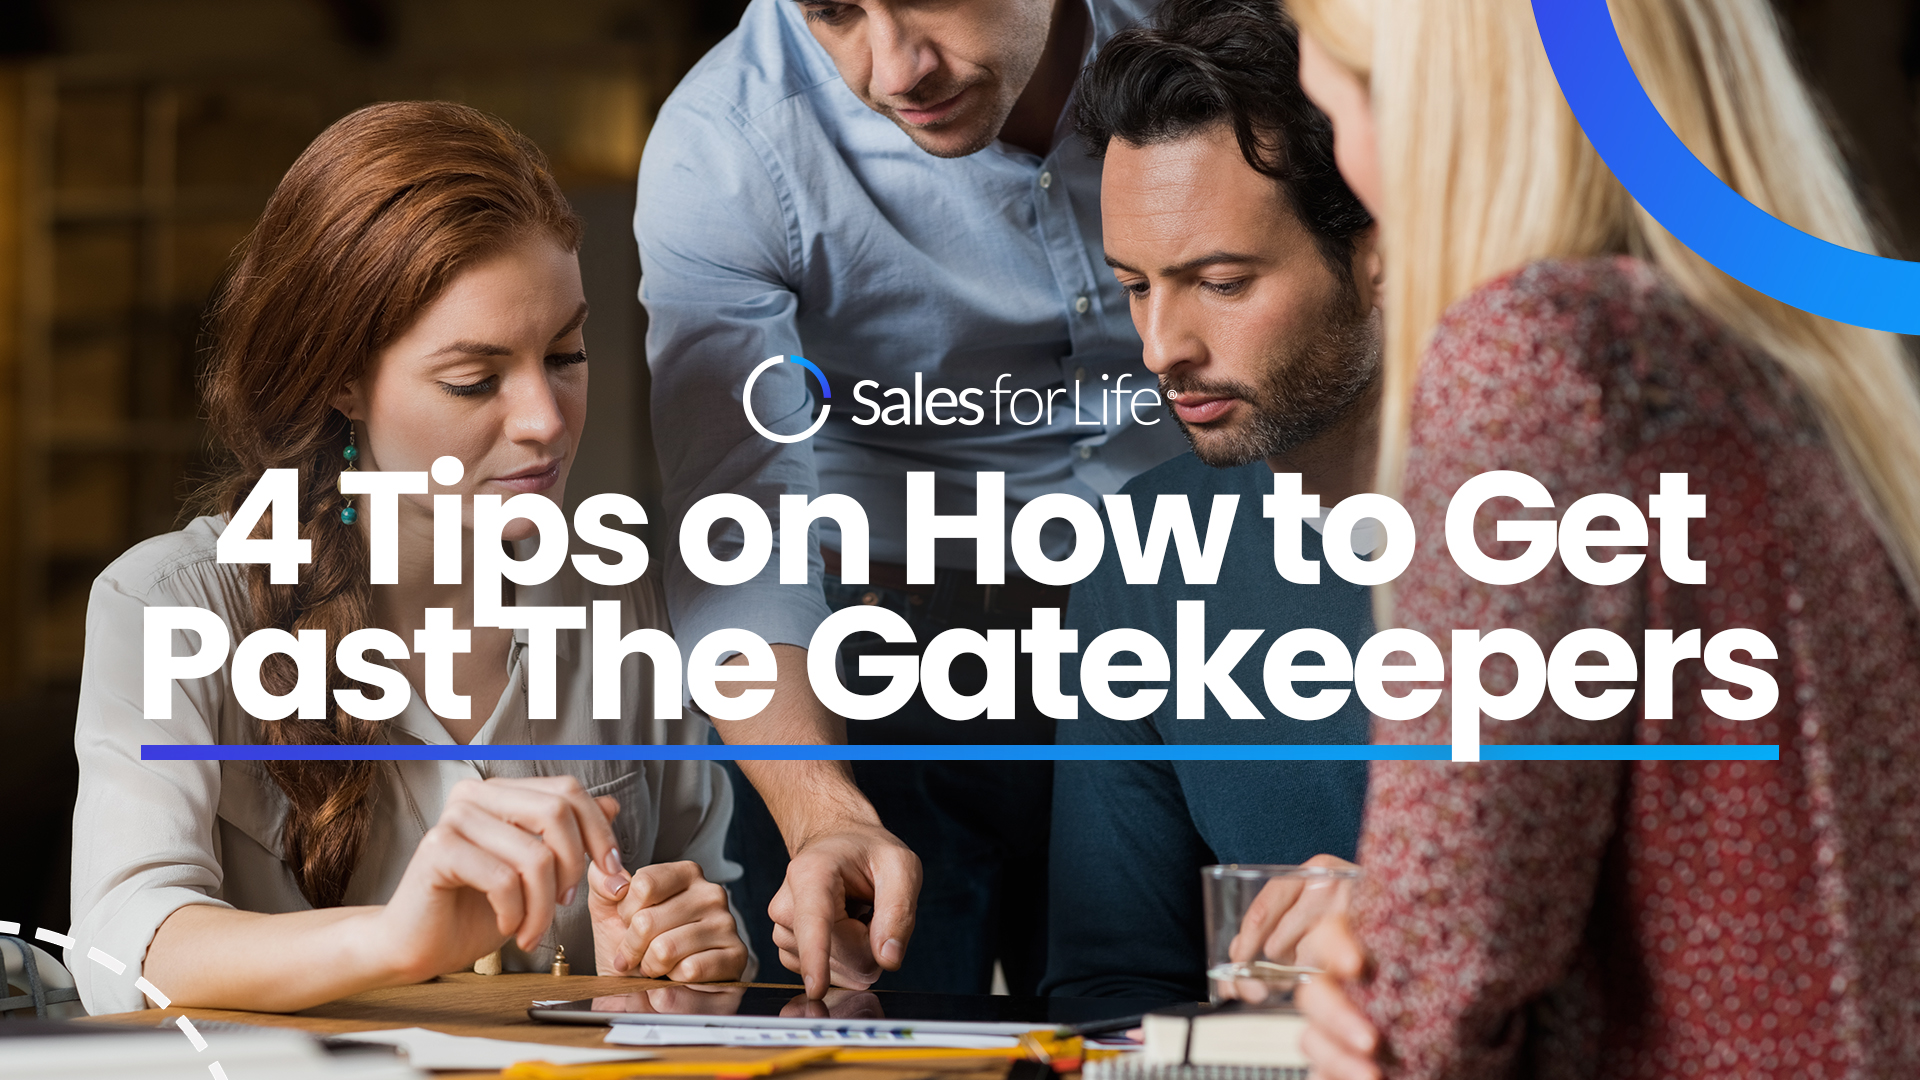 4 Tips on How to Get Past the Gatekeepers